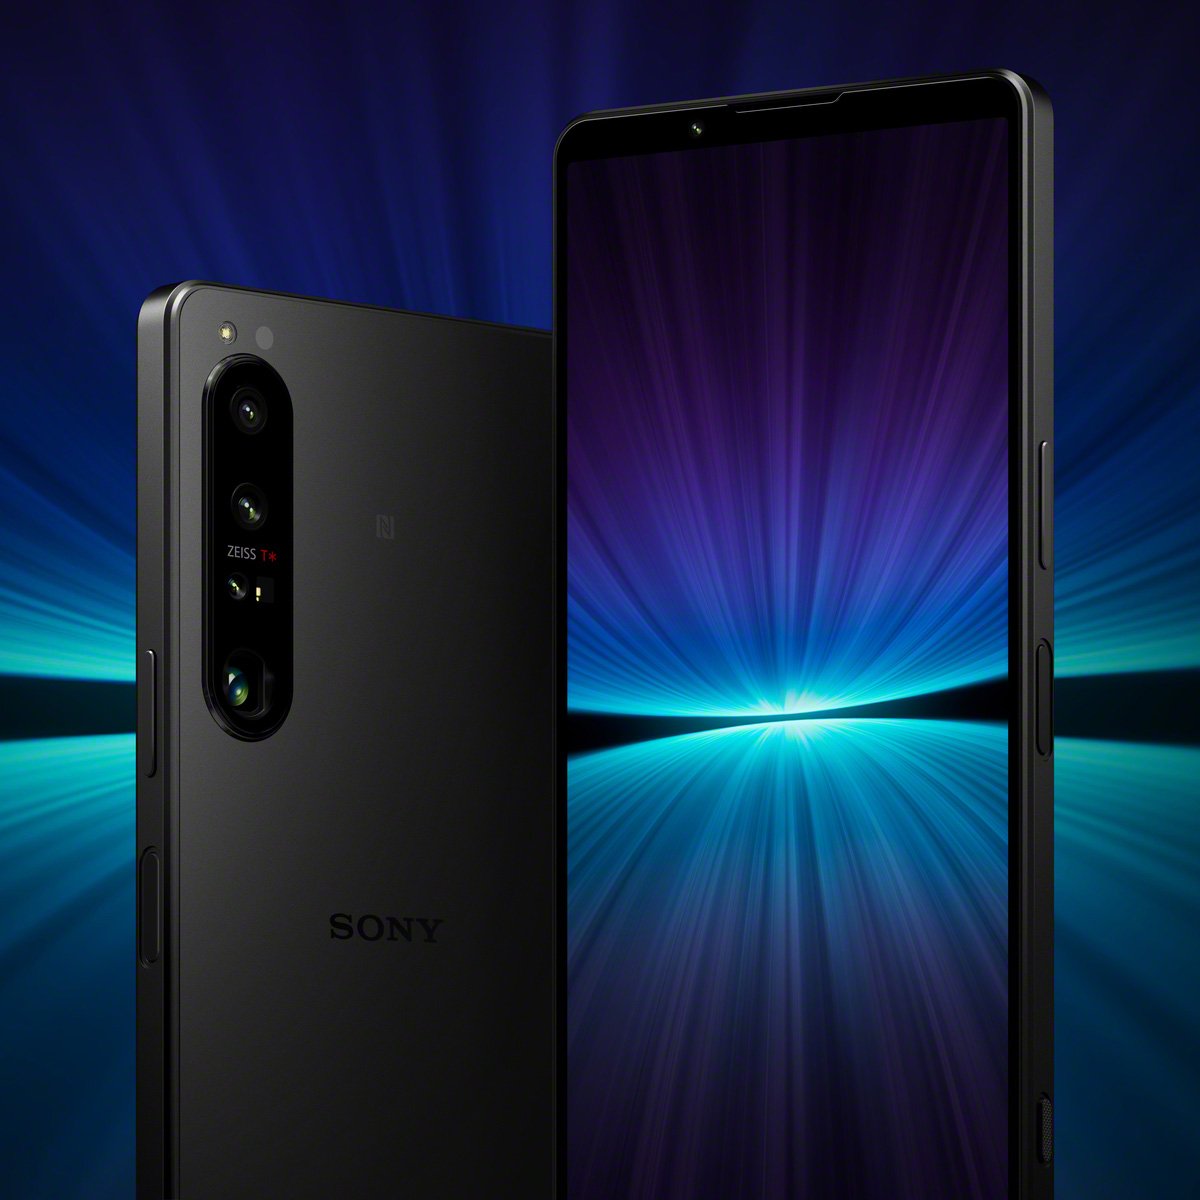 Sony's Xperia 1 IV is the World's First Smartphone with True Optical